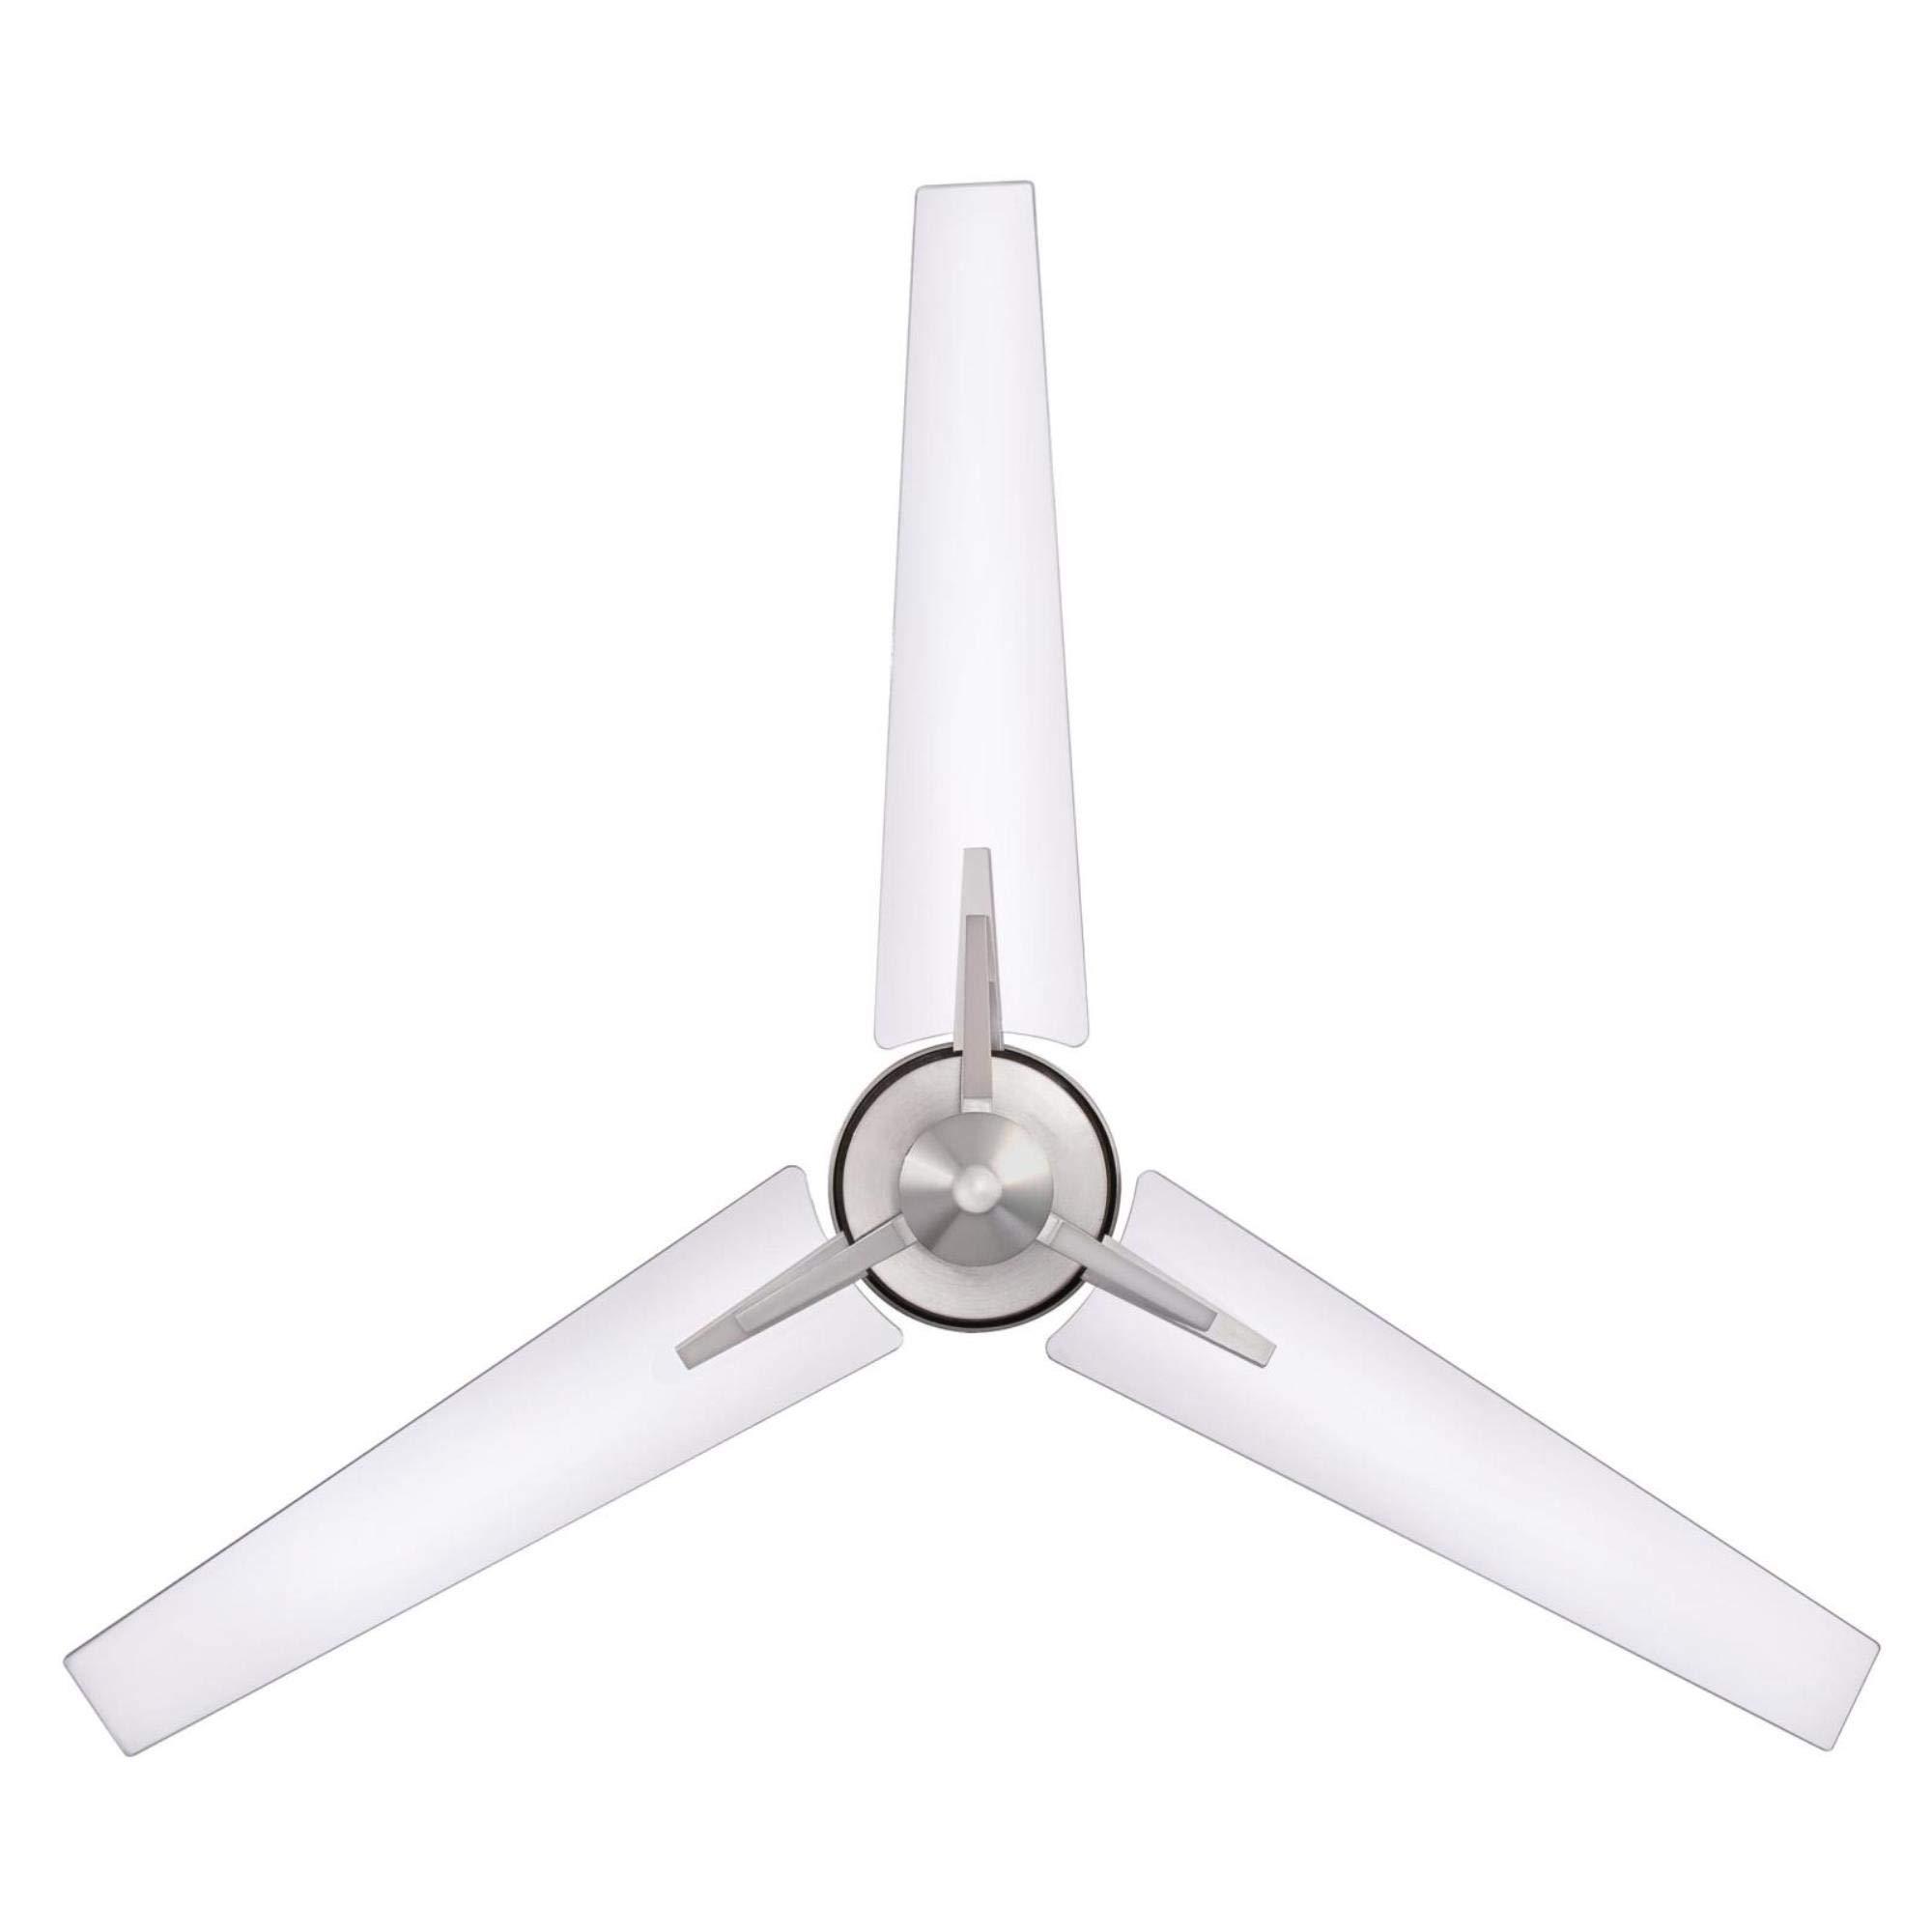 westinghouse lighting 7225500 julien, modern industrial ceiling fan with remote control, 54 inch, brushed nickel finish